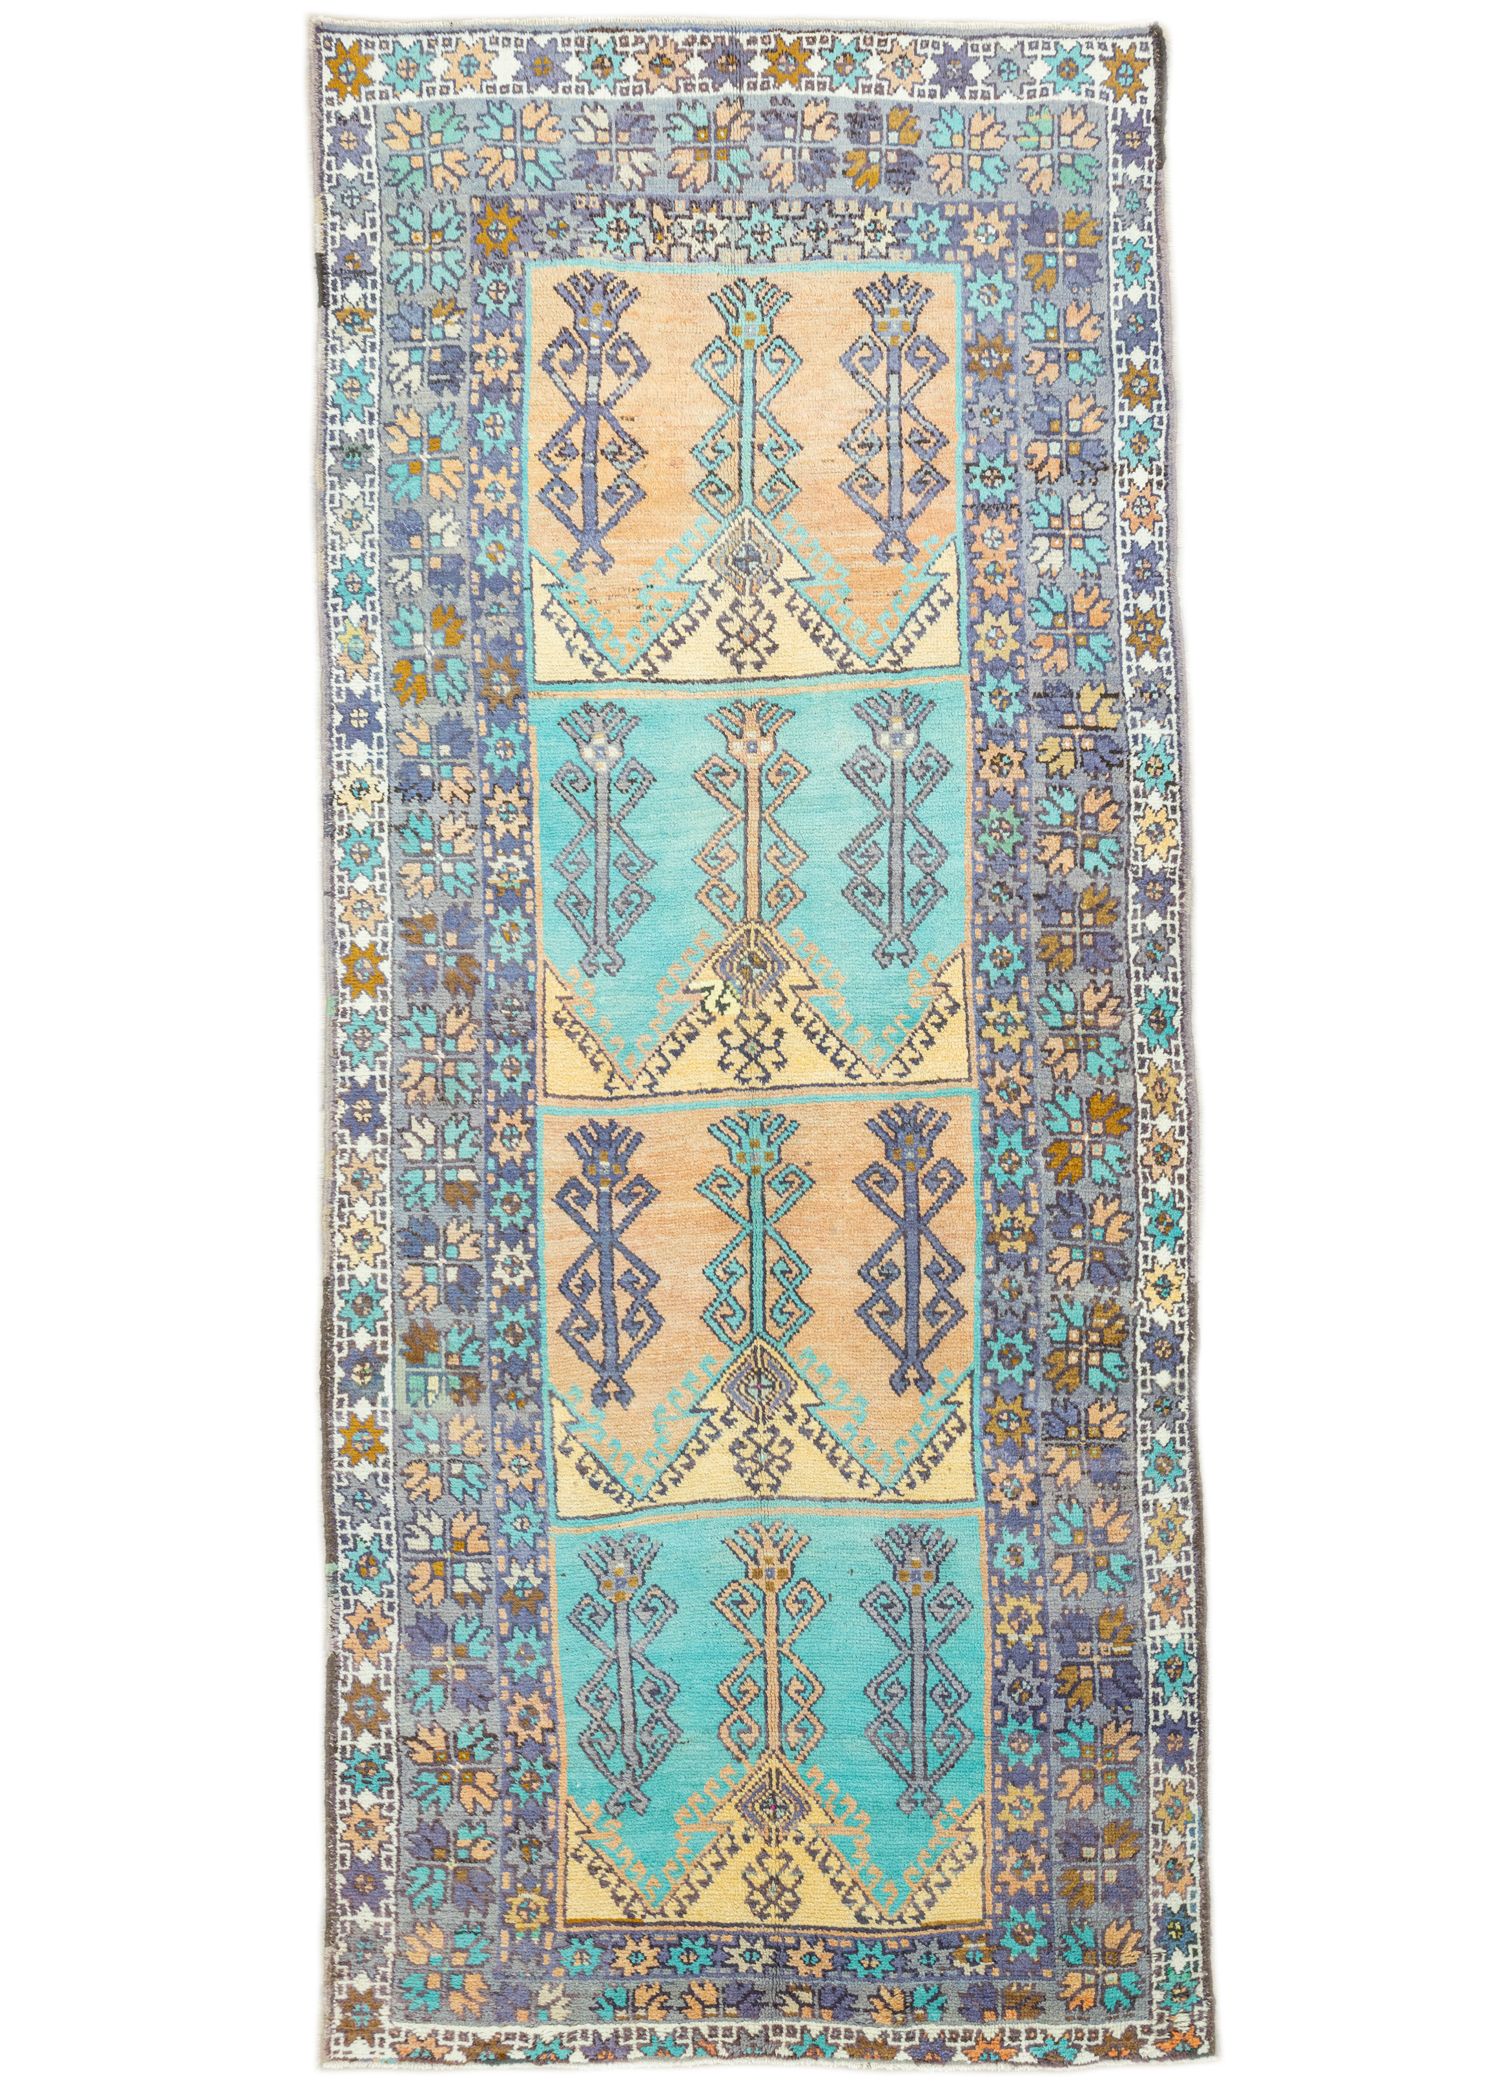 Tayte Abudance Patterned Colorful Wool Rug 158x371 cm